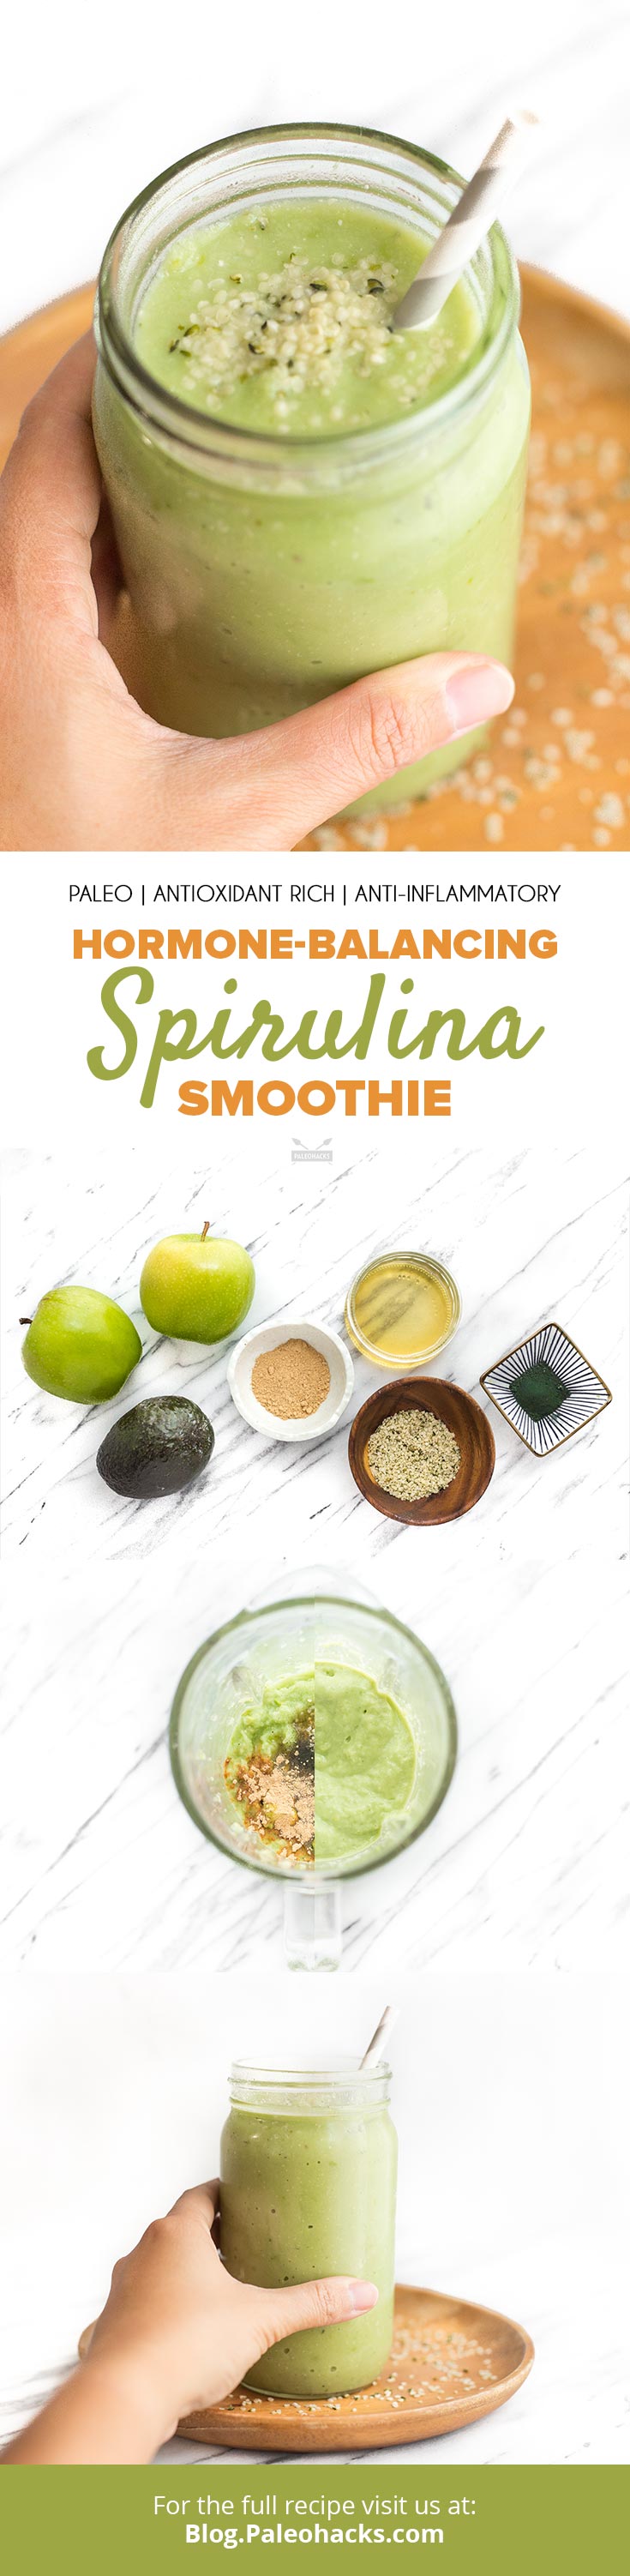 Whip up this 5-minute spirulina smoothie for a boost of energy and nutrients that’ll help balance your hormones. It's a green, lean, spirulina machine!